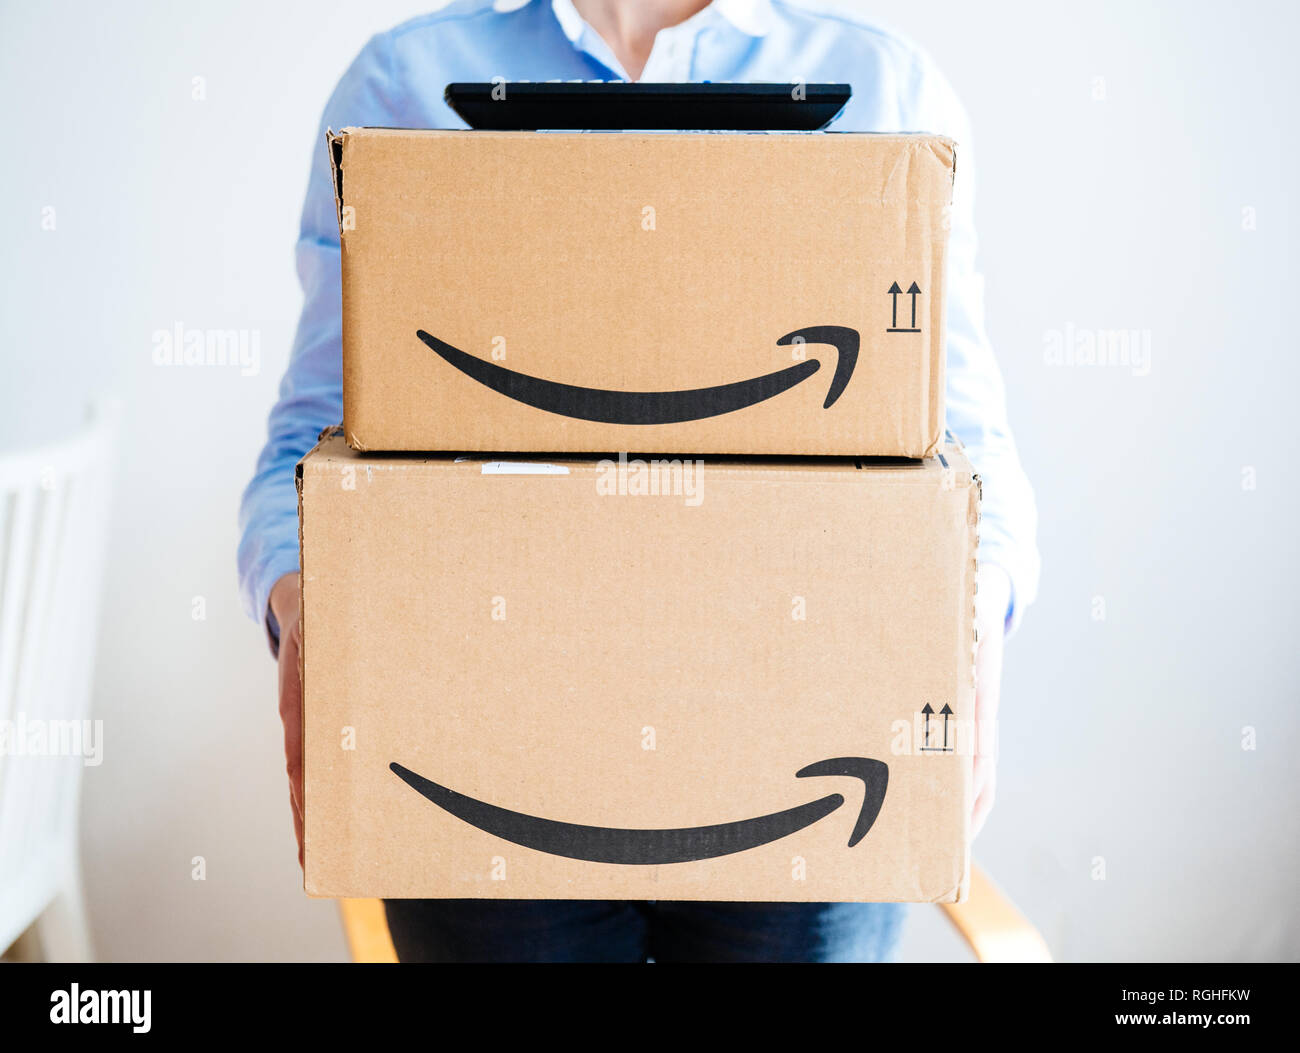 PARIS, FRANCE - MAR 16, 2018: Vie from the front of happy smiling woman holding two large Amazon Prime cardboard boxing after delivery - TV set remote on top on boxes  Stock Photo